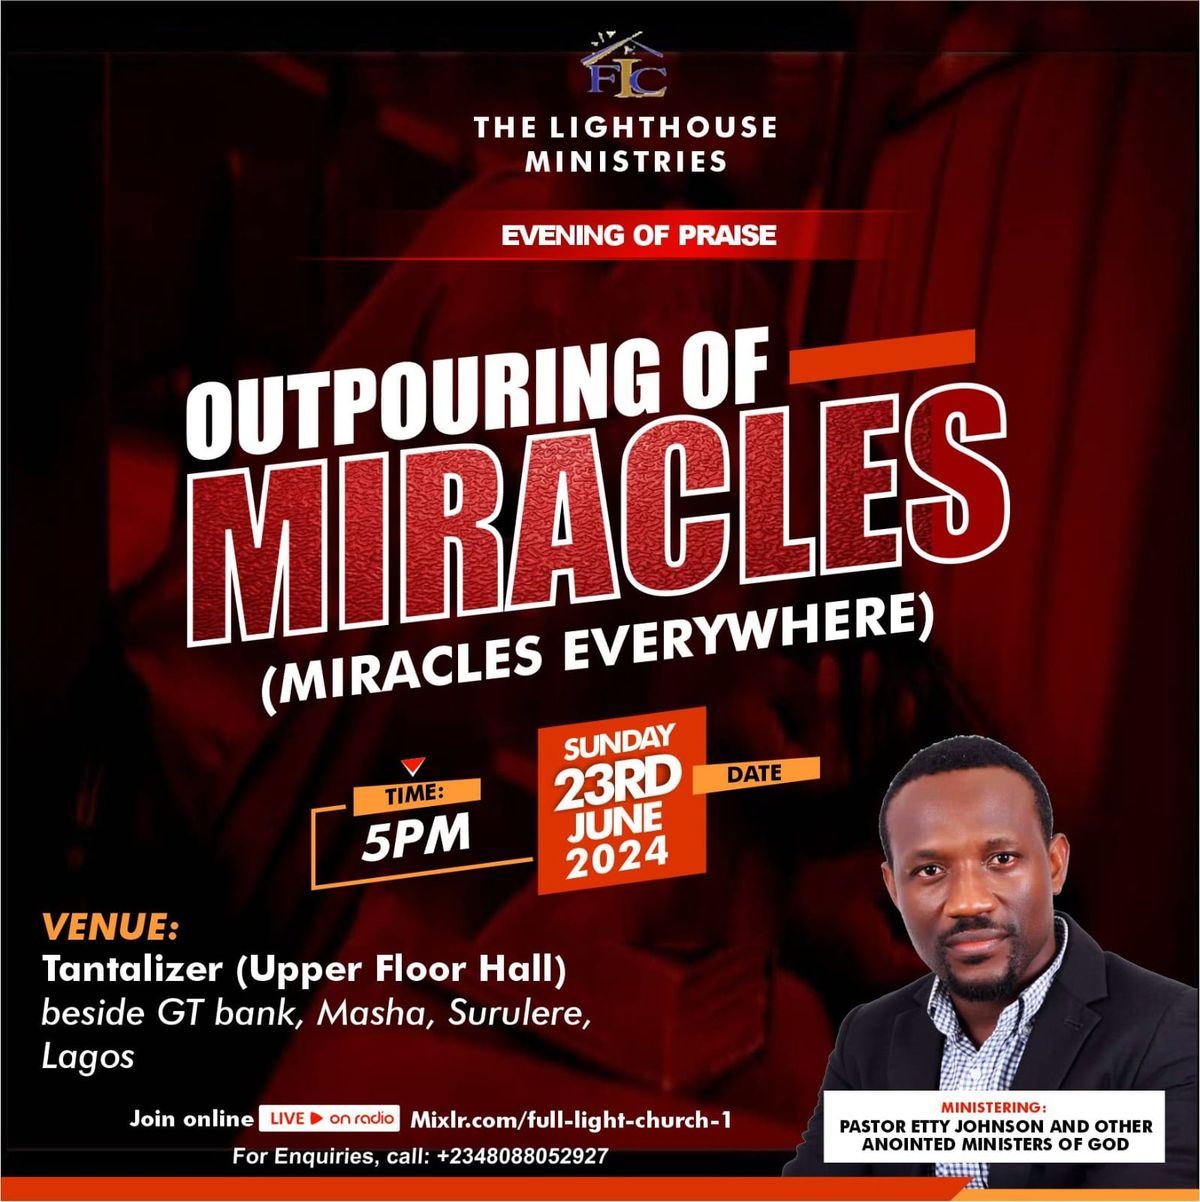 OUTPOURING OF MIRACLES